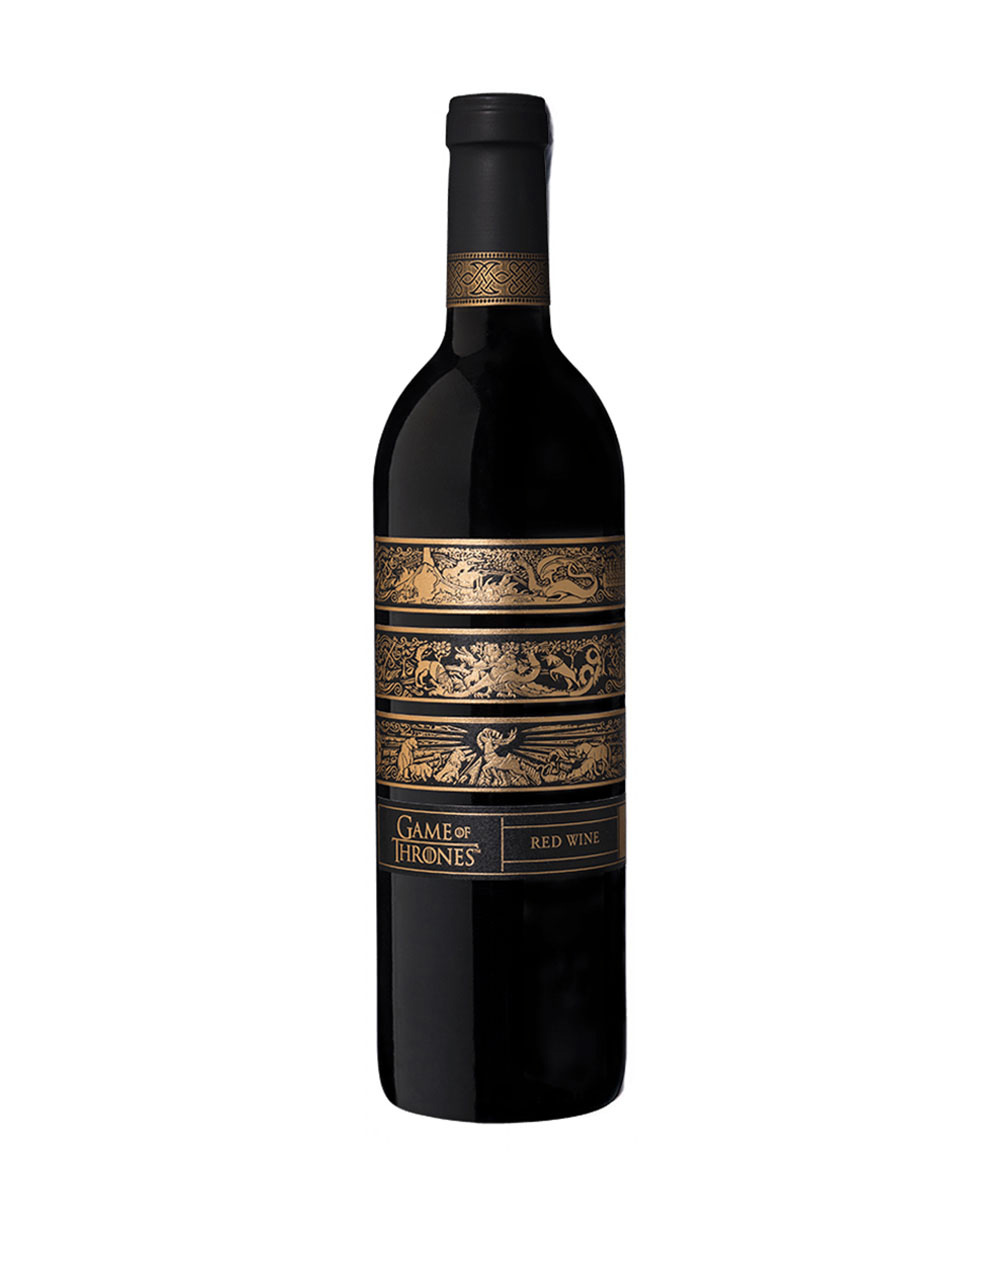 Game of Thrones 2017 Paso Robles Red wine